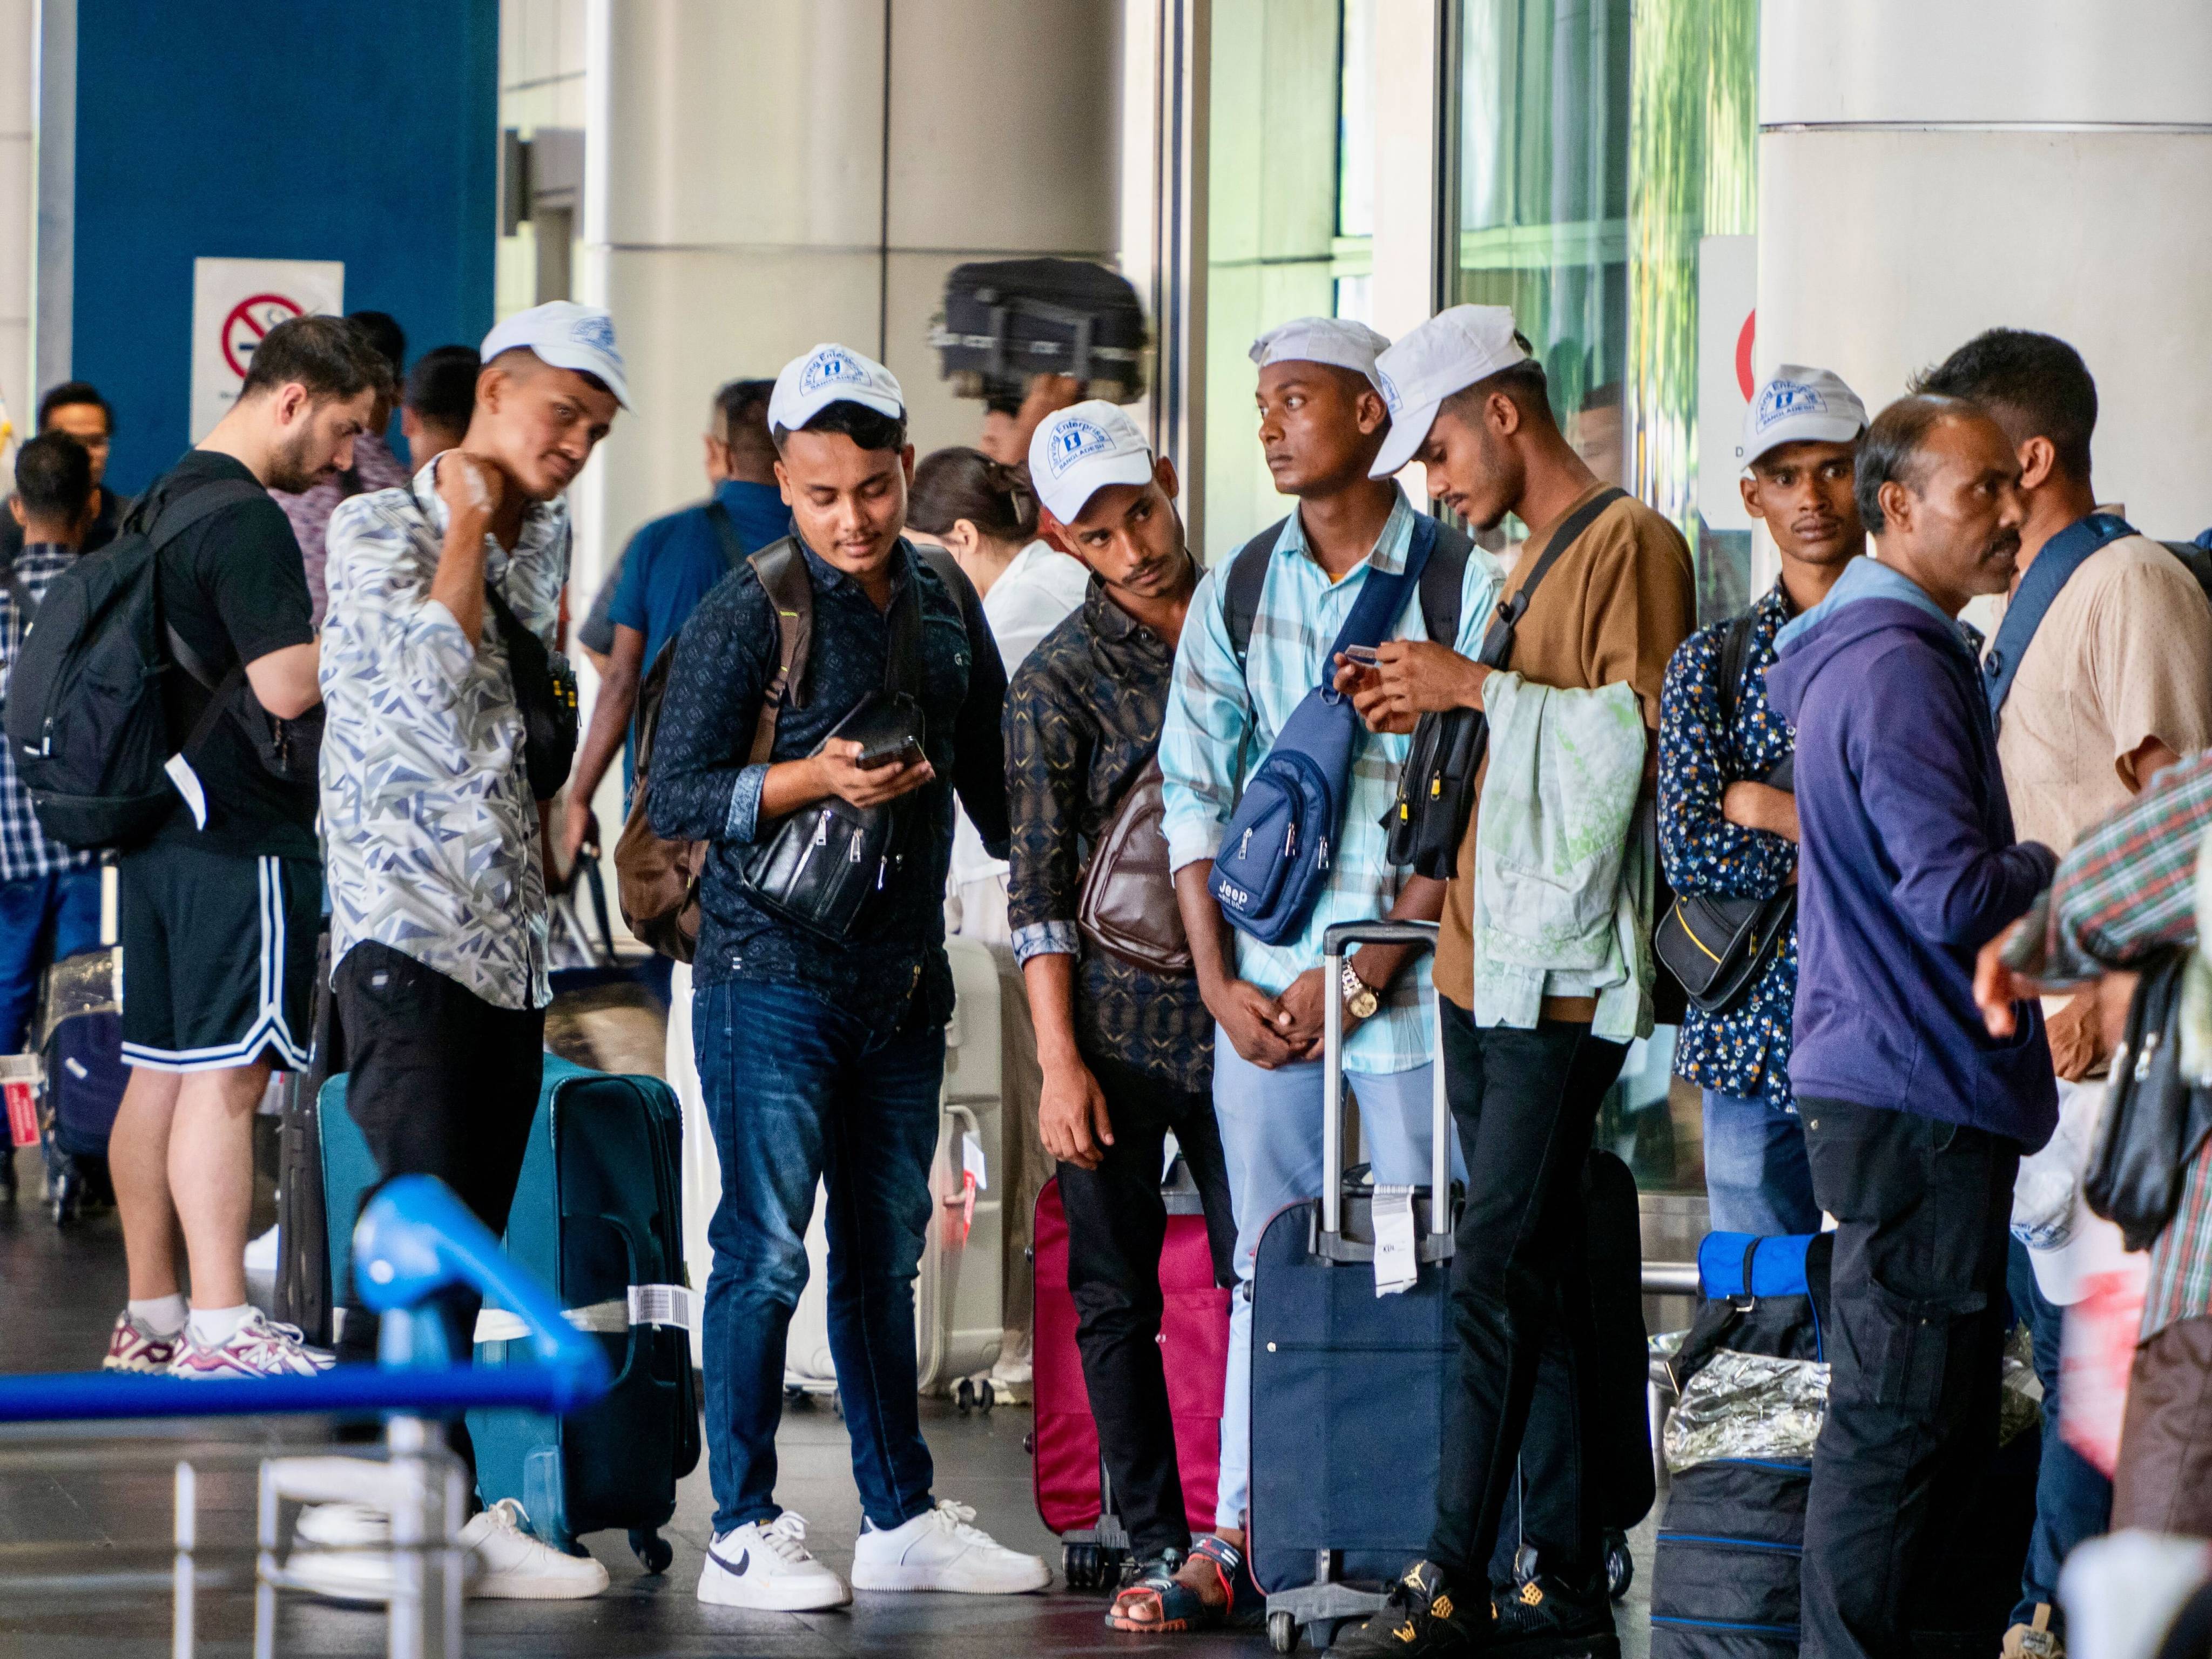 Bangladeshis congregating at the Kuala Lumpur International Lumpur as they rush to beat a May 31 deadline imposed by Malaysia’s government for legal work registration.  Photo: Hadi Azmi